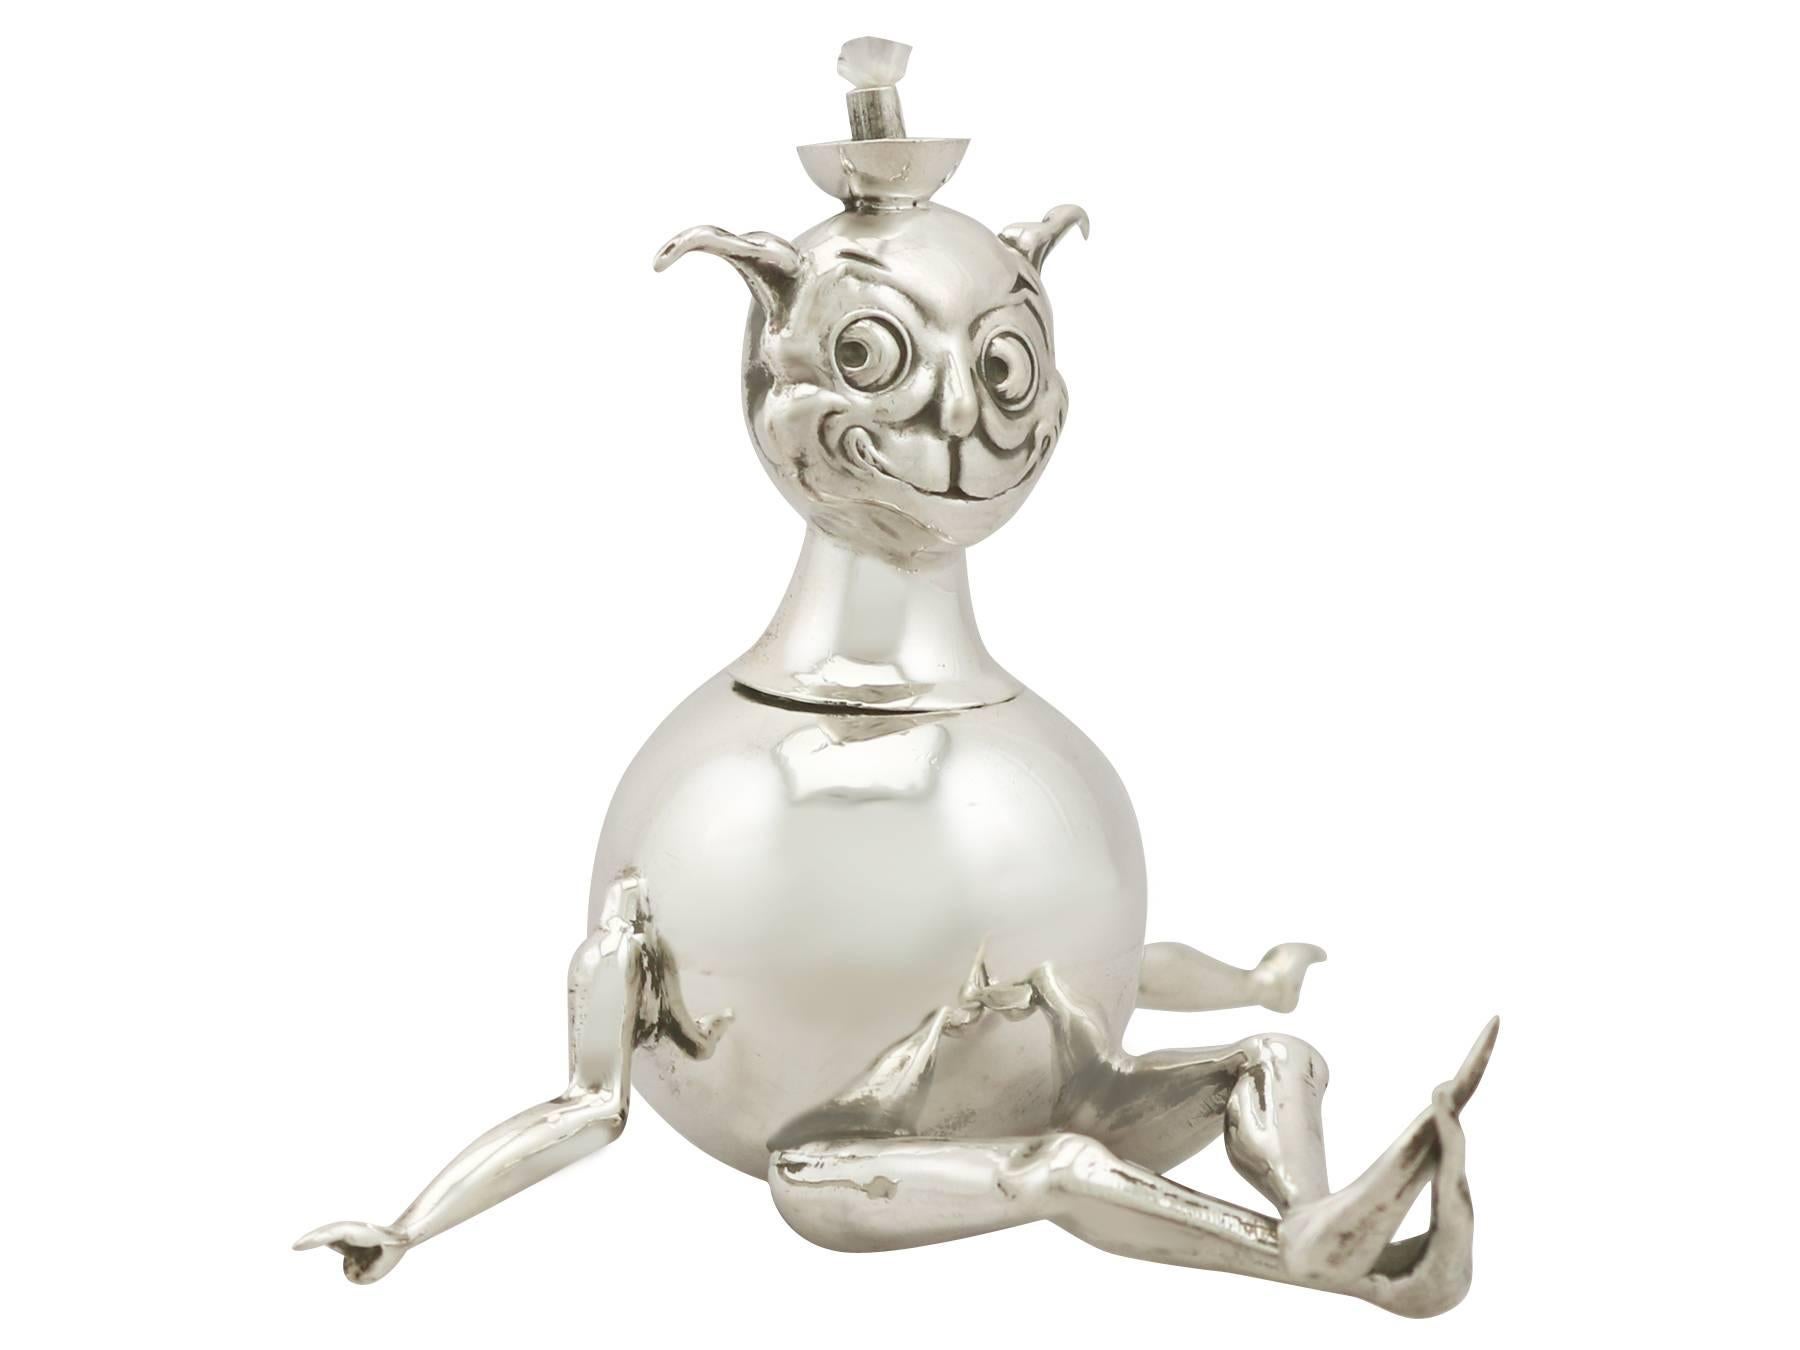 An exceptional, fine and impressive antique George V English sterling silver cigarette/cigar table lighter modelled in the form of a grotesque figure; an addition to our smoking related silverware collection

This exceptional antique George V